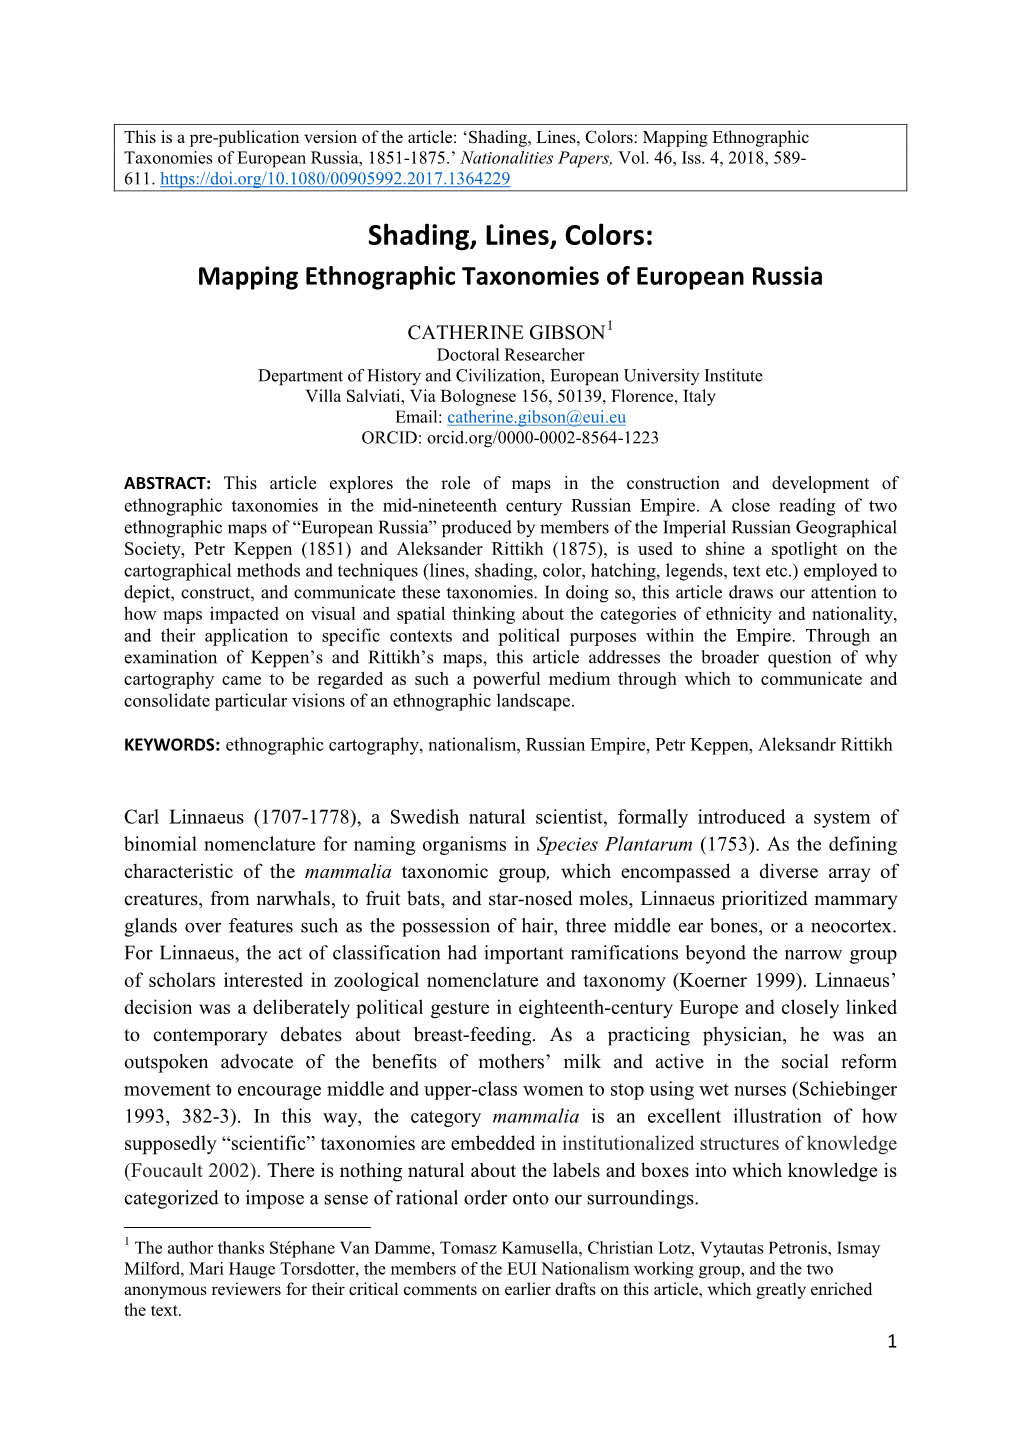 Shading, Lines, Colors: Mapping Ethnographic Taxonomies of European Russia, 1851-1875.’ Nationalities Papers, Vol